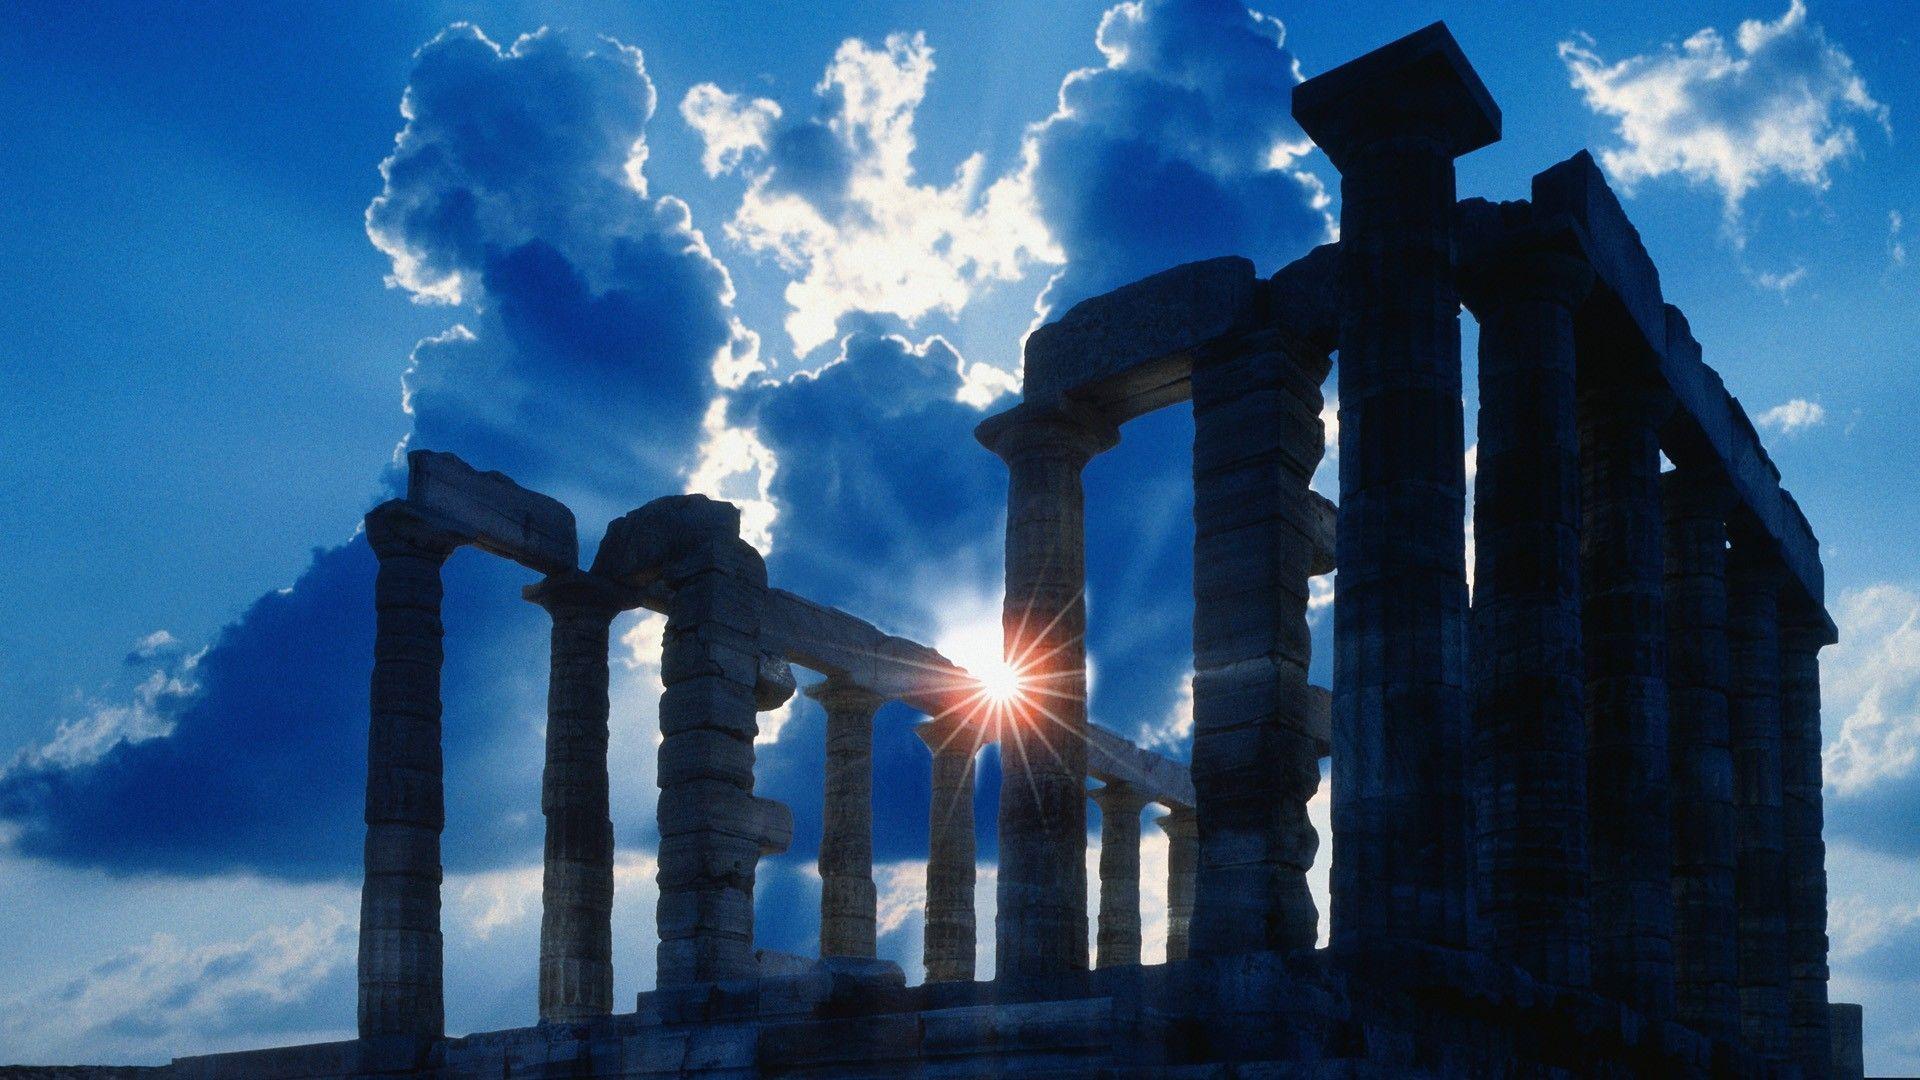 Greece Wallpaper Android Apps on Google PlayD Wallpaper